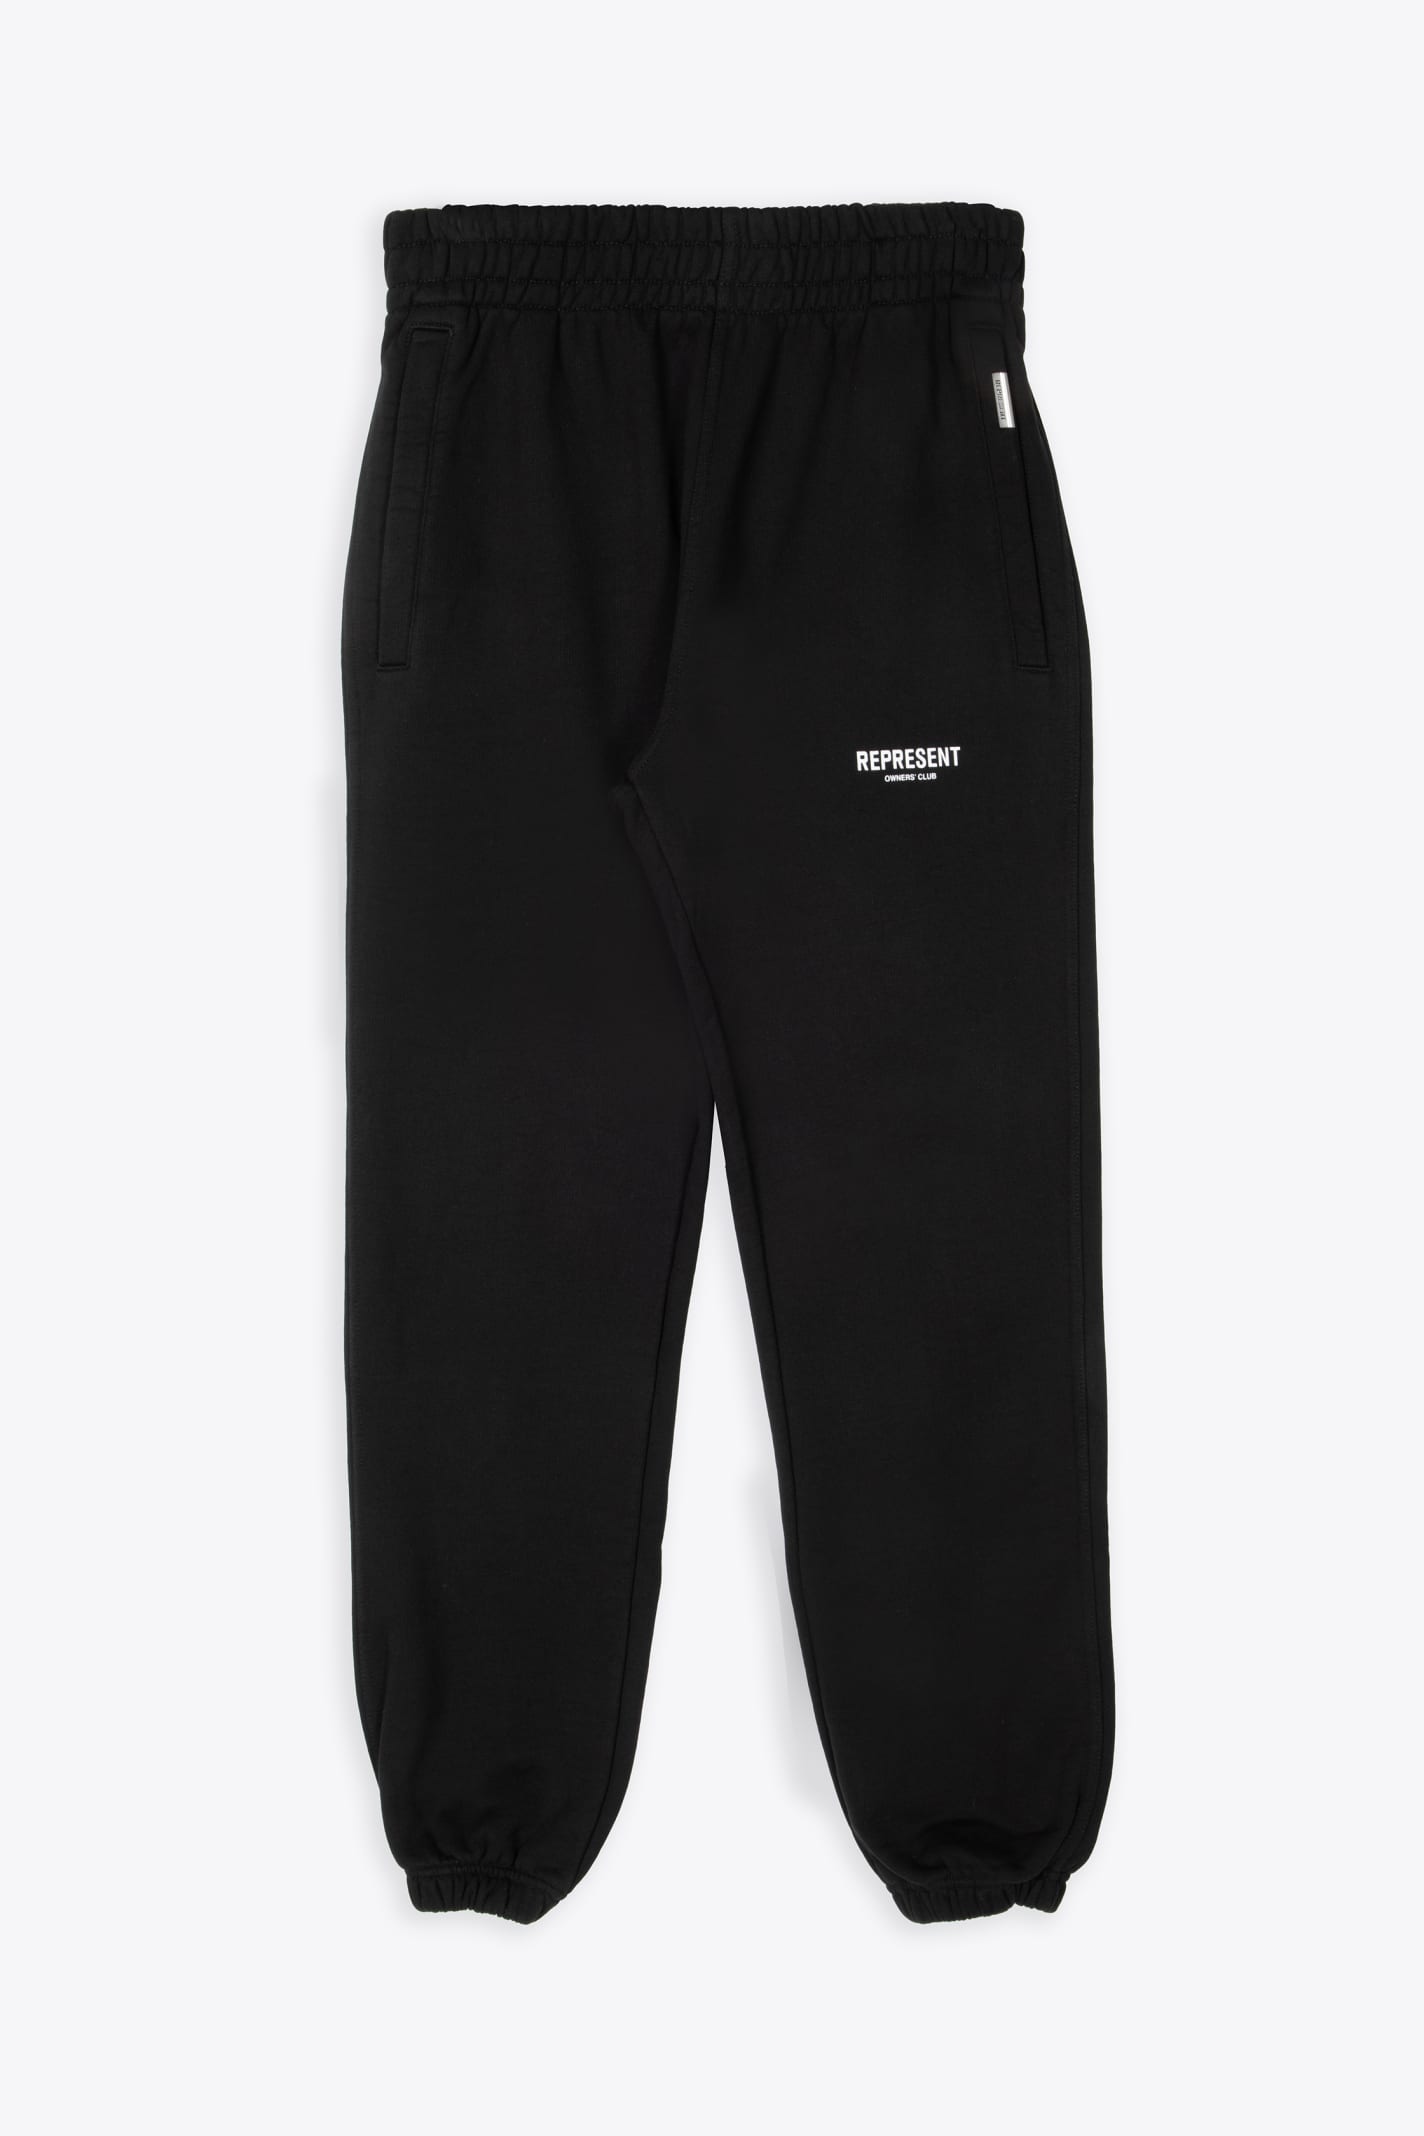 Owners Club Relaxed Sweatpants Black Cotton Sweatpants - Owners Club Relaxed Sweatpants